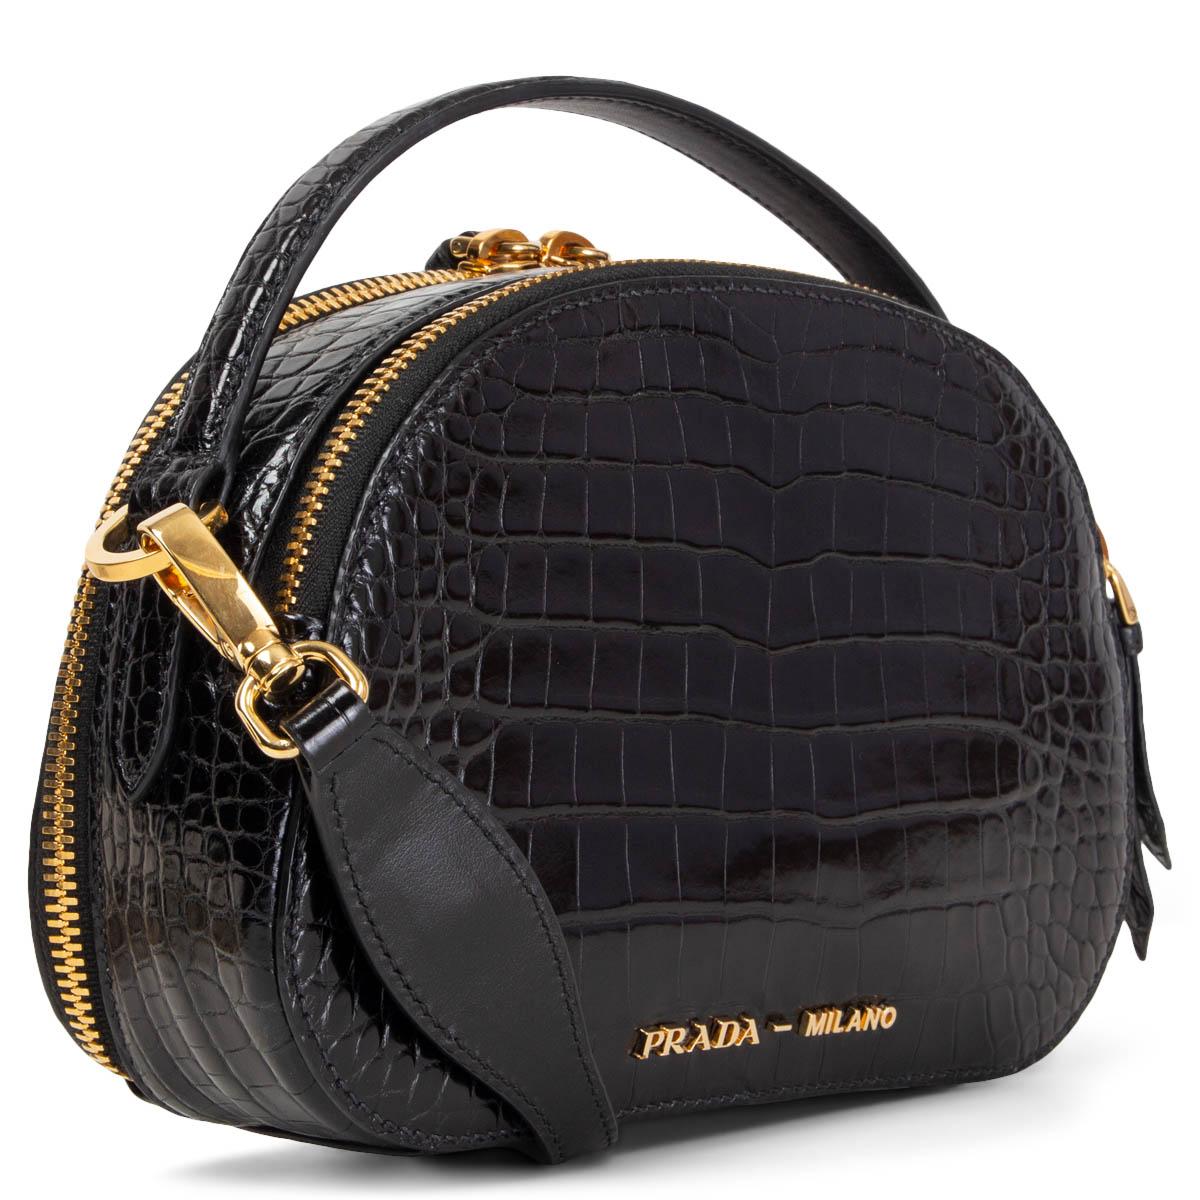 100% authentic Prada Odette Crocodile Bandoliera shoulder bag in black croco leather. Its dual zip compartments are lined with smooth black lambskin and equipped with one slip pocket. Comes with a detachable, adjustable shoulder strap and a top